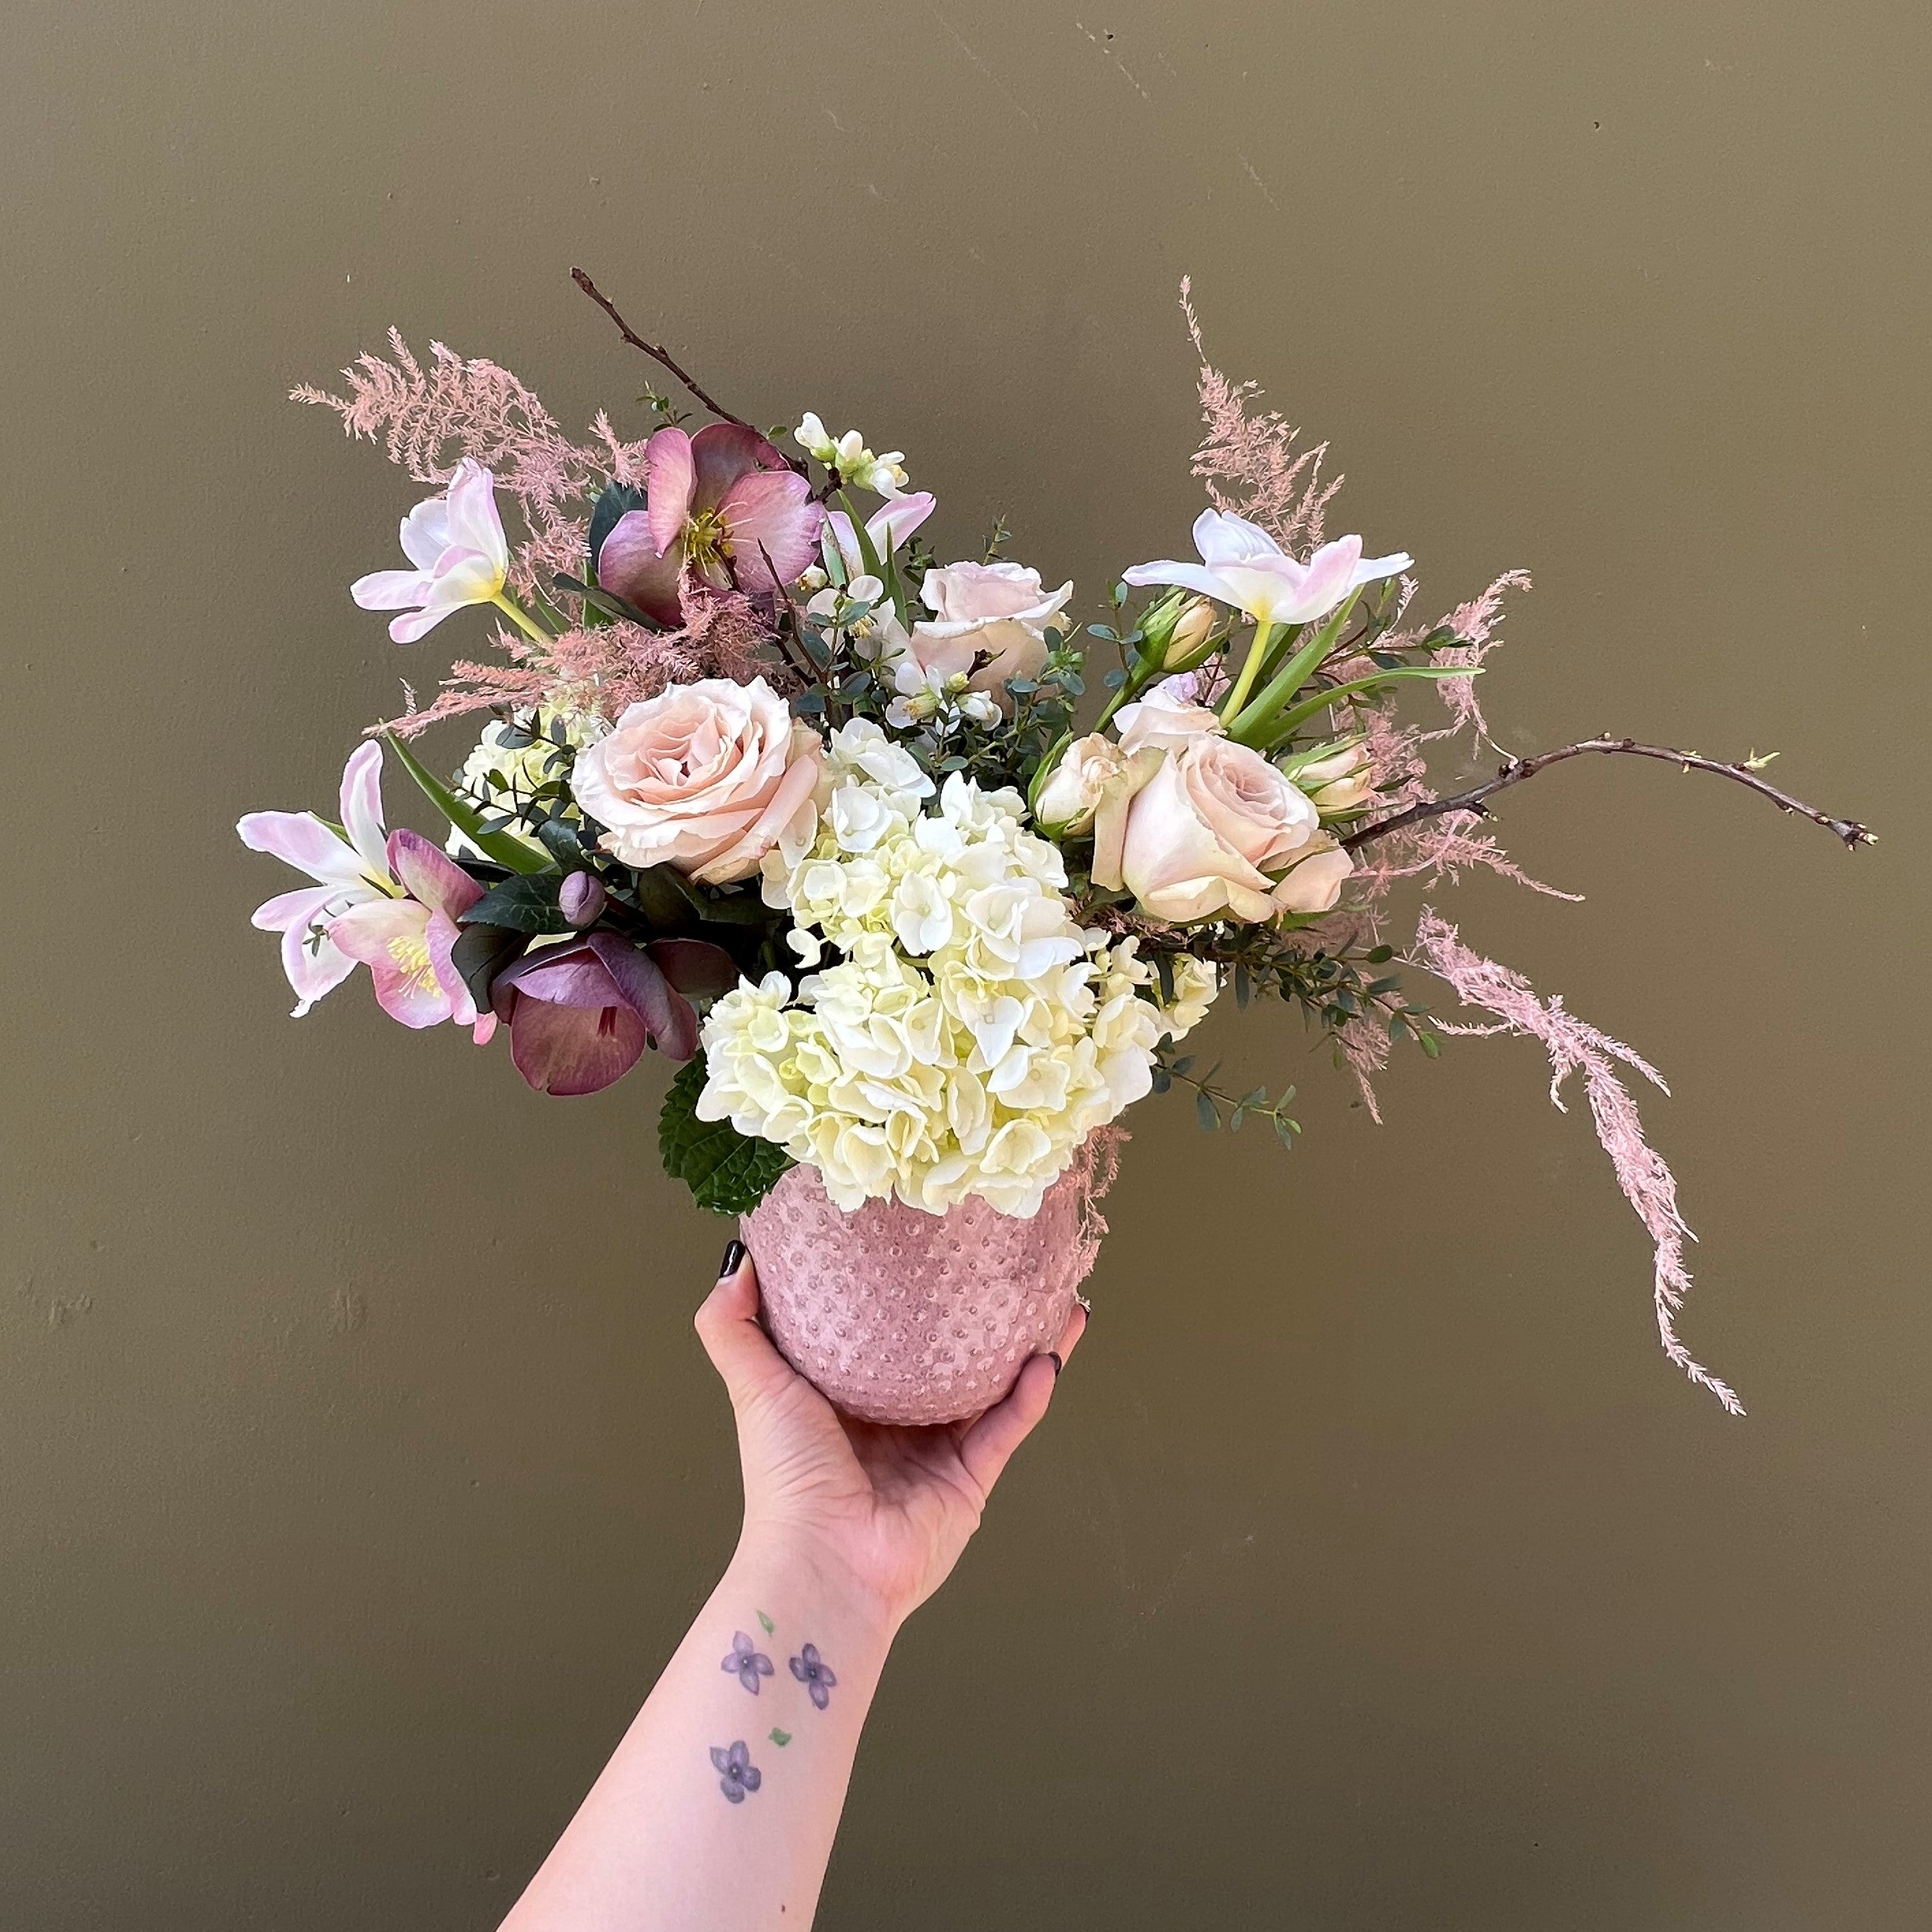 How to Make Your Cut Flowers Last Longer